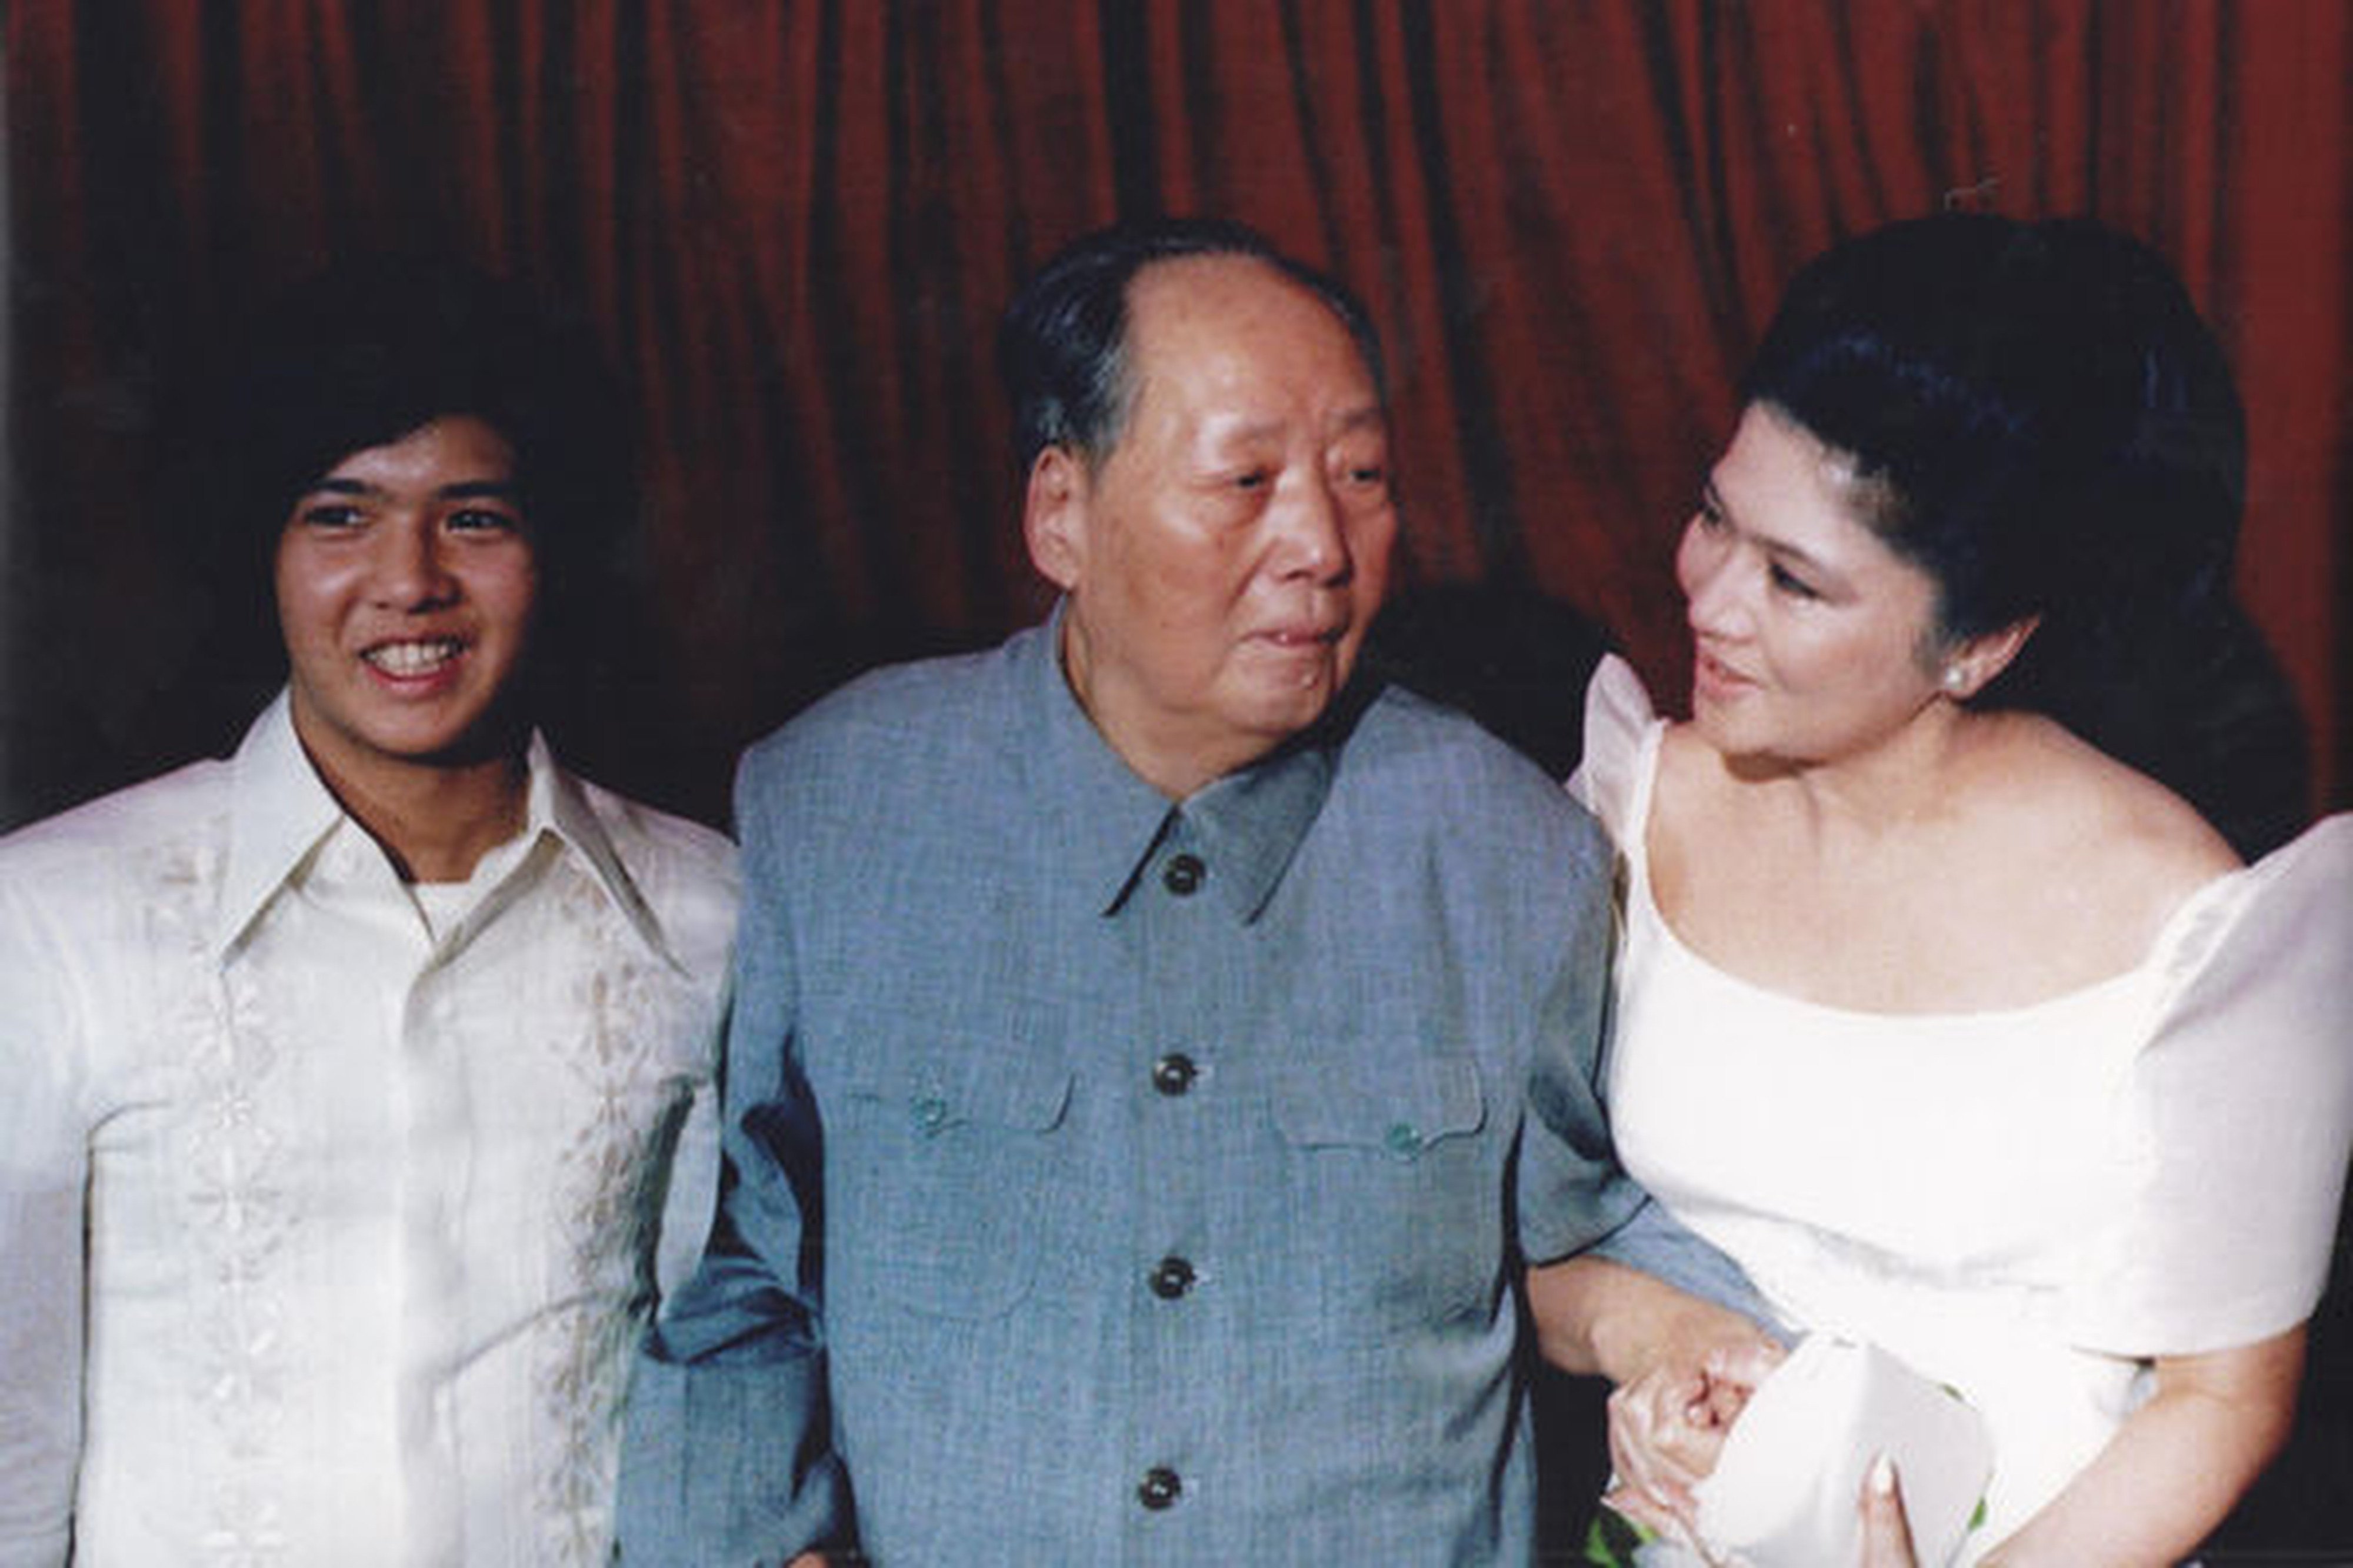 Mao Zedong meets Bongbong Marcos and his mother Imelda Marcos in 1974. File photo: Handout